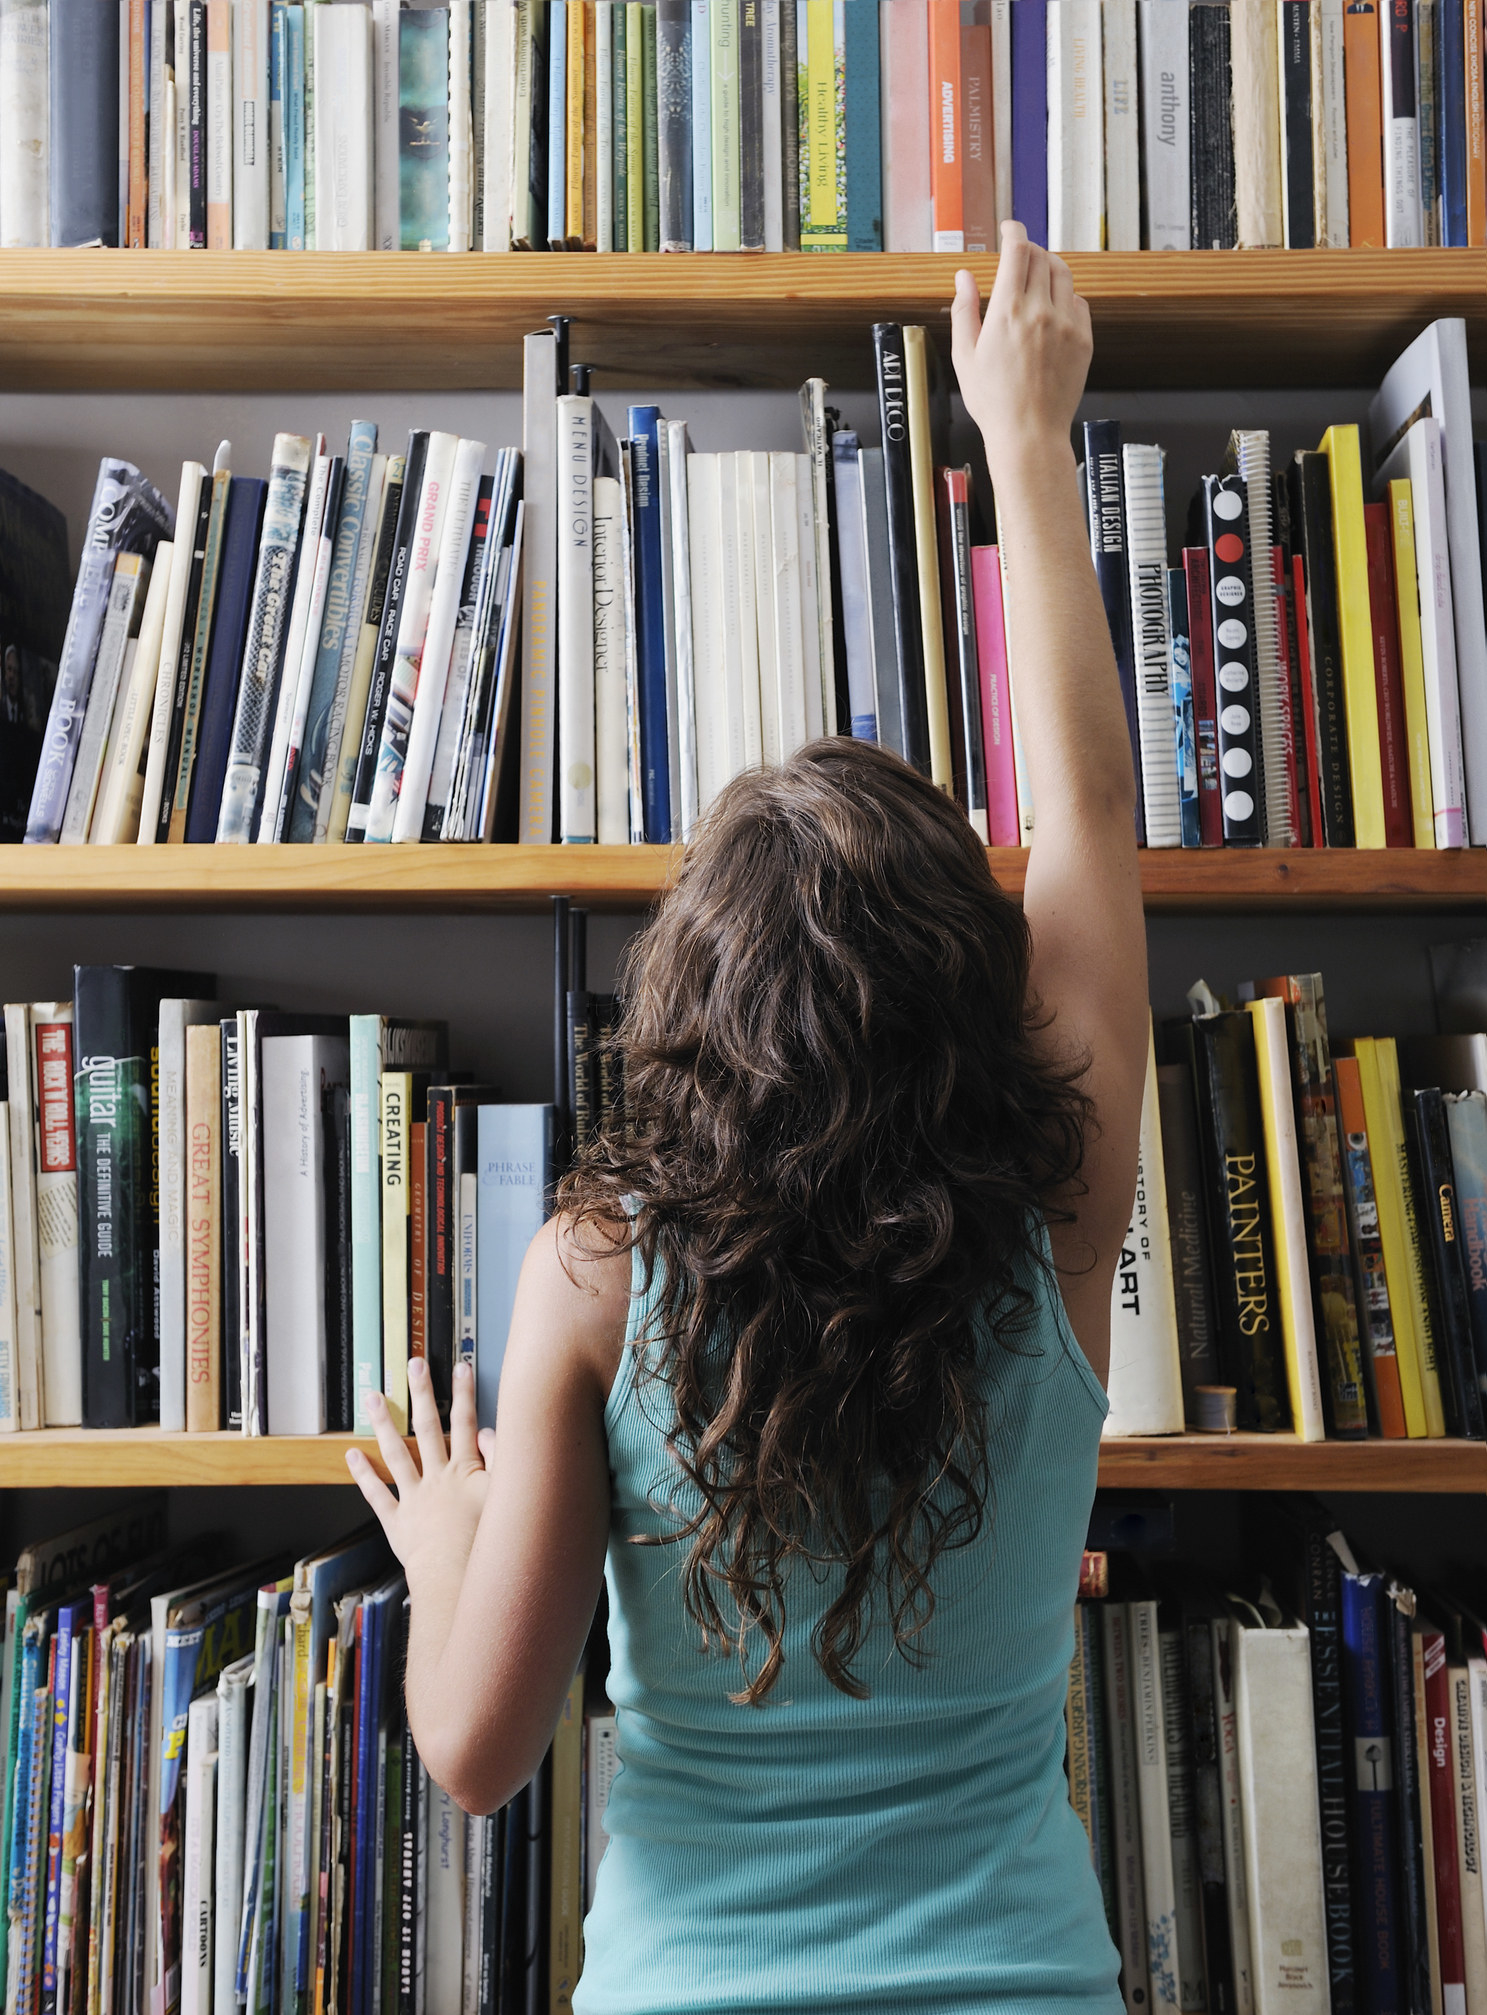 A woman reaching for a book on a shelf